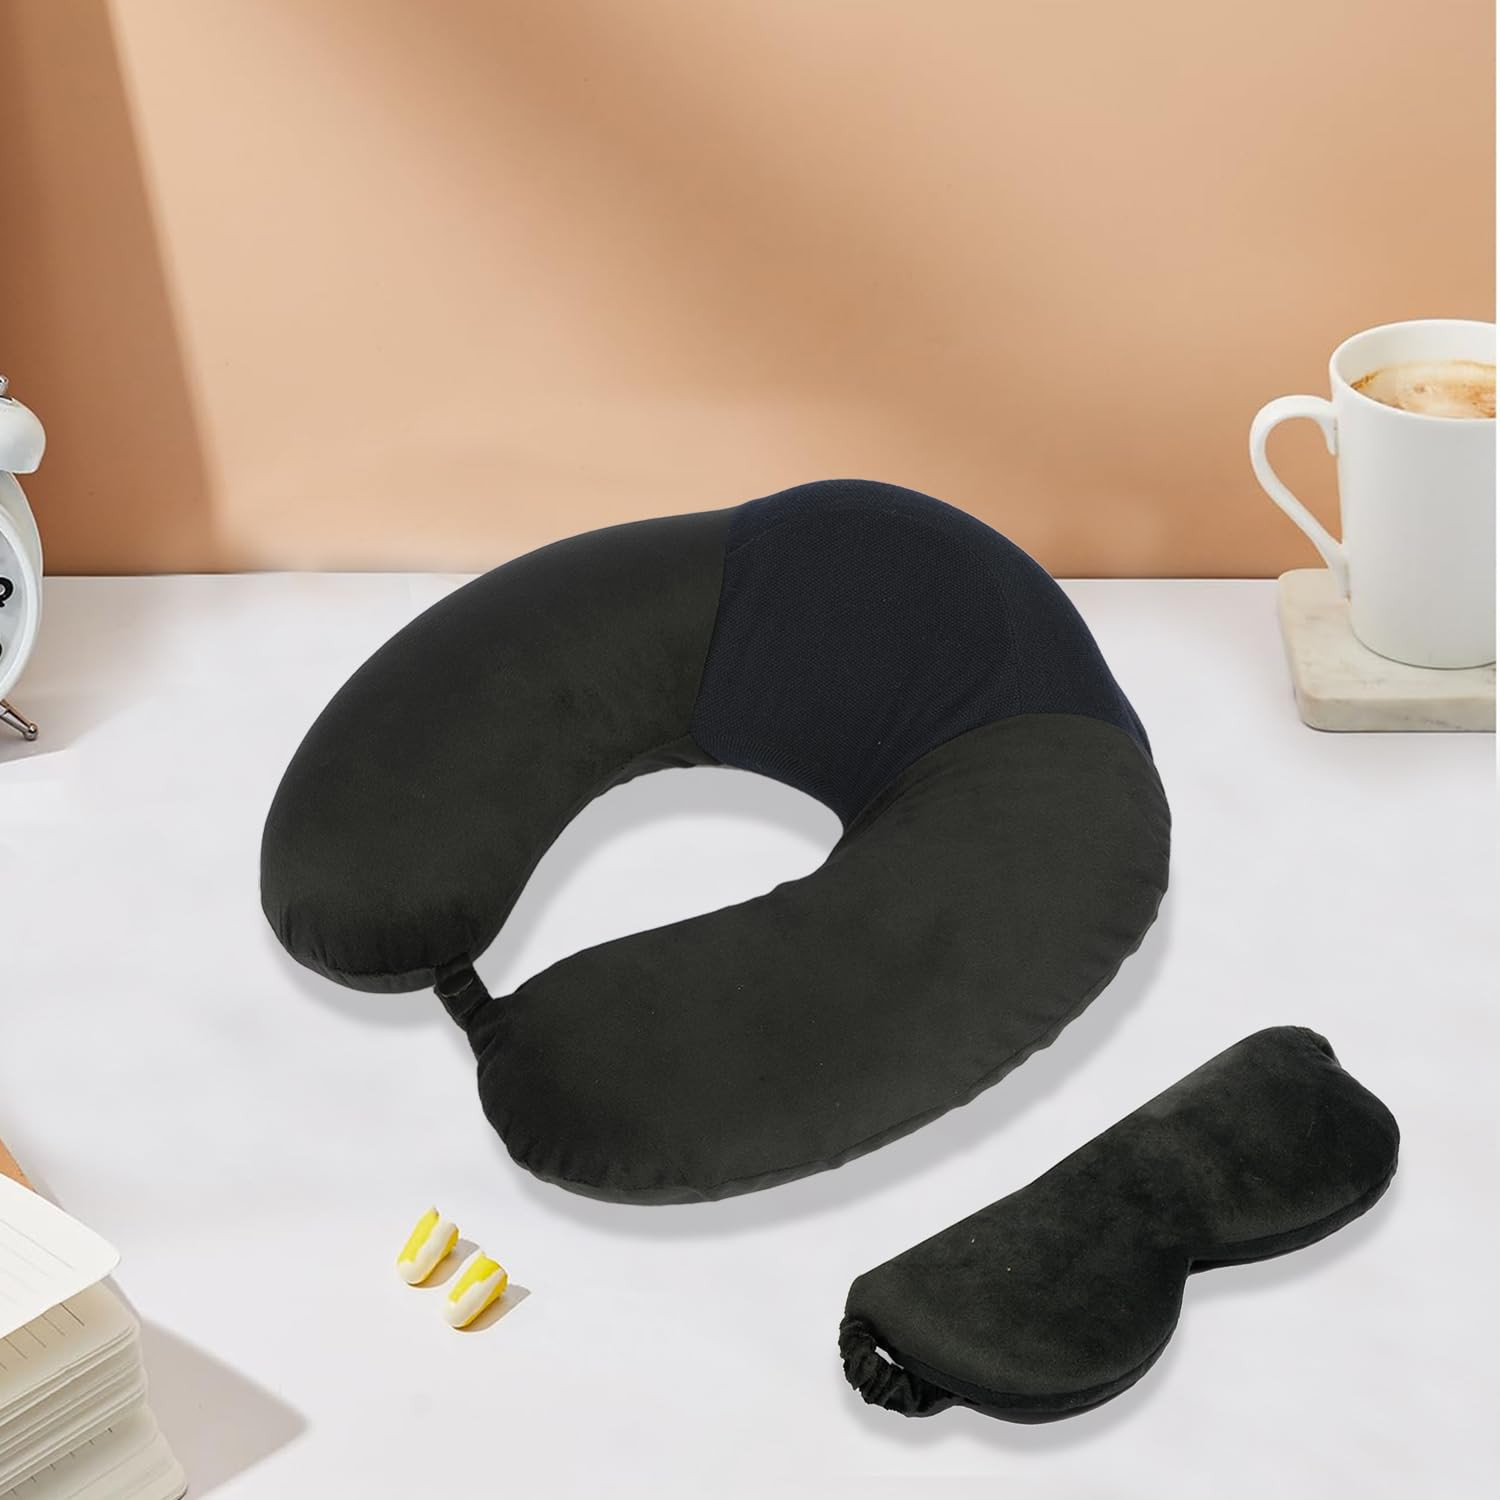 Kuber Industries Travel Neck Pillow With Sleeping Eye Mask|Neck Support Rest Pillow|Velvet Cover With Microfiber Fillling (Black)